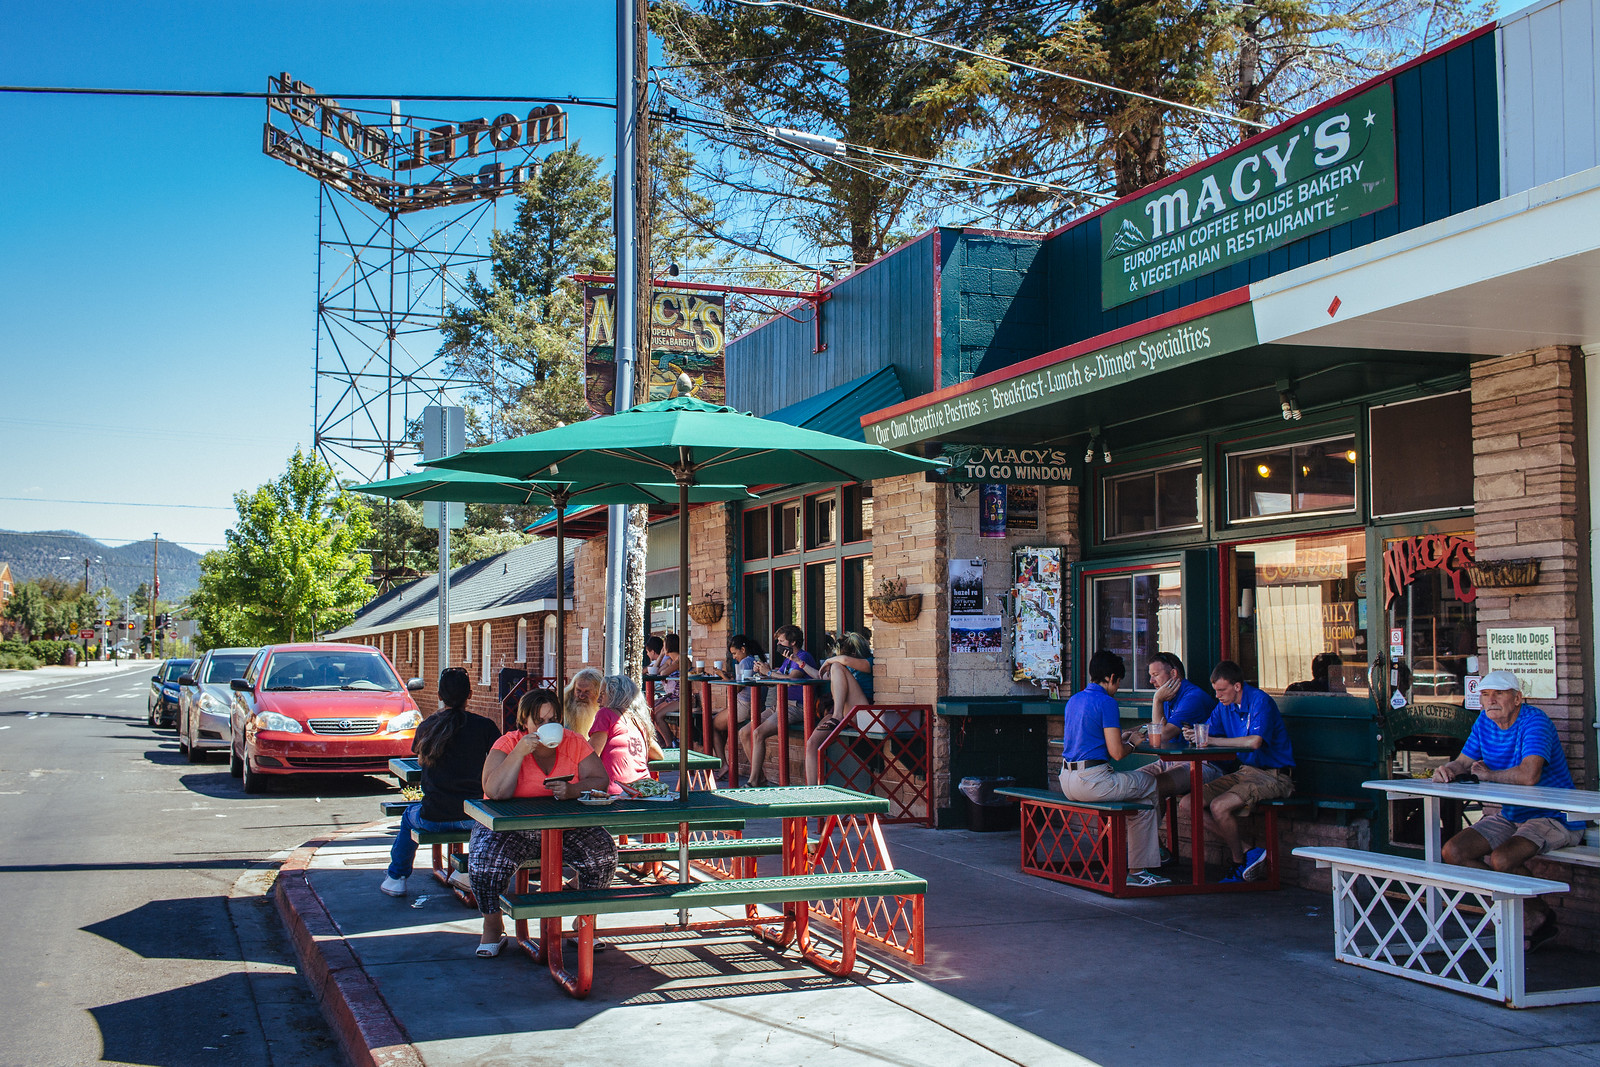 Customers sit at tables on a café patio in Flagstaff, Arizona